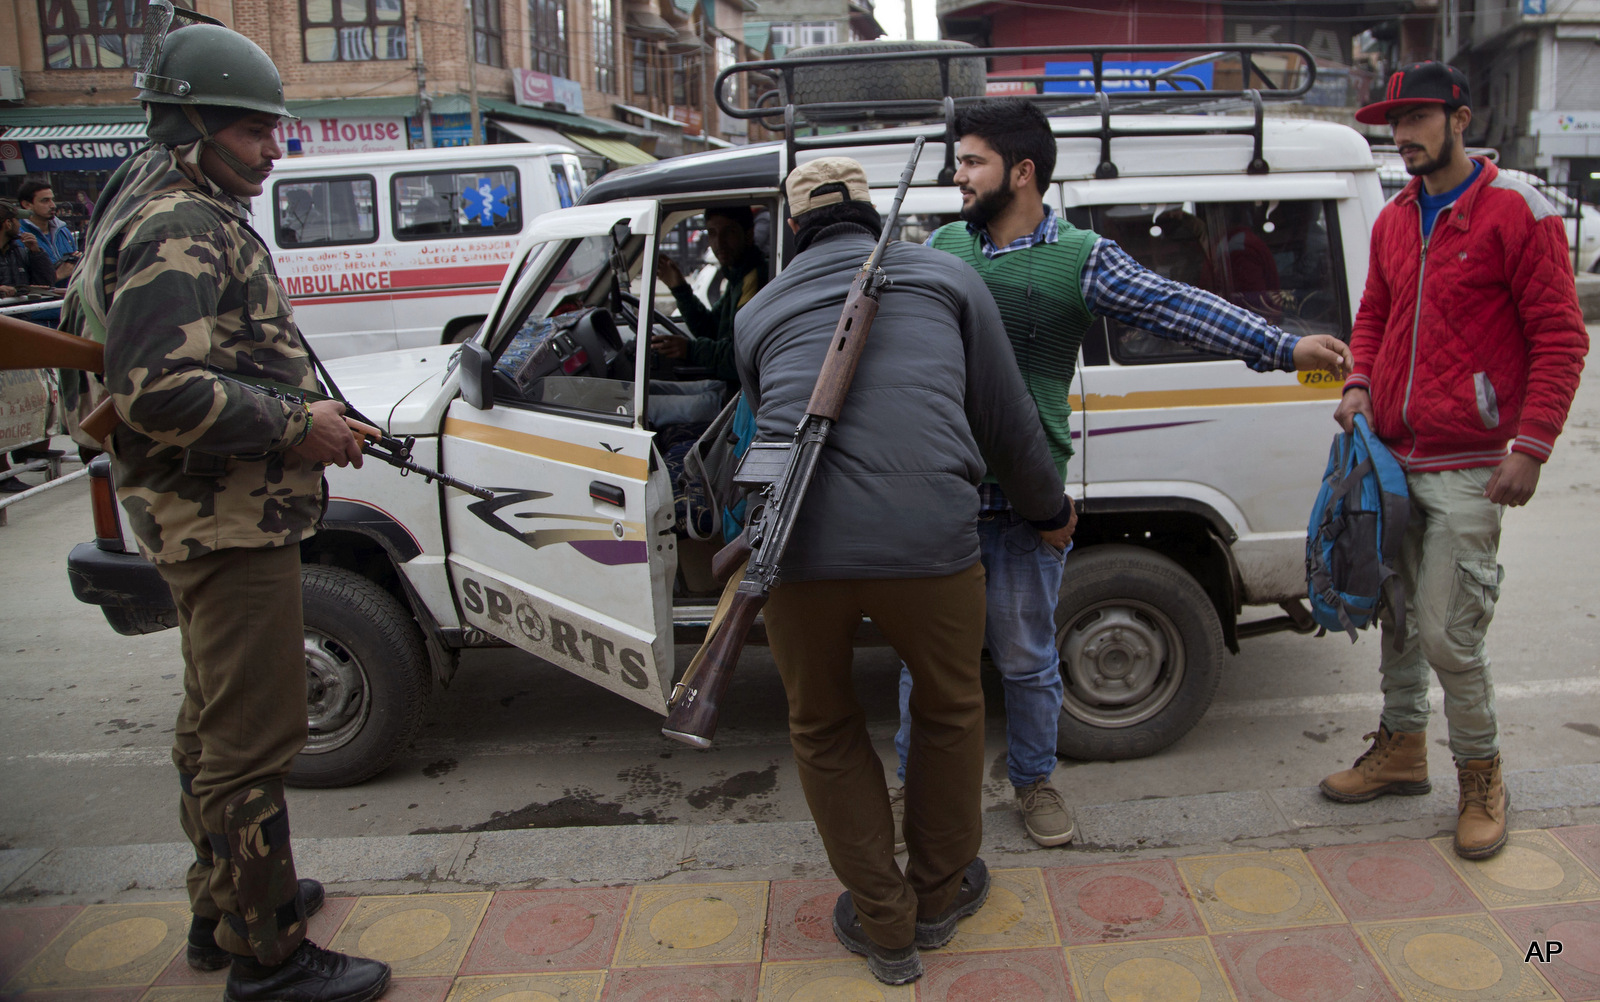 An Indian police man frisks a Kashmiri youth as an Indian paramilitary soldier, left, stands guard at a temporary checkpoint in Srinagar, Indian occupied Kashmir, Wednesday, Nov. 4, 2015.